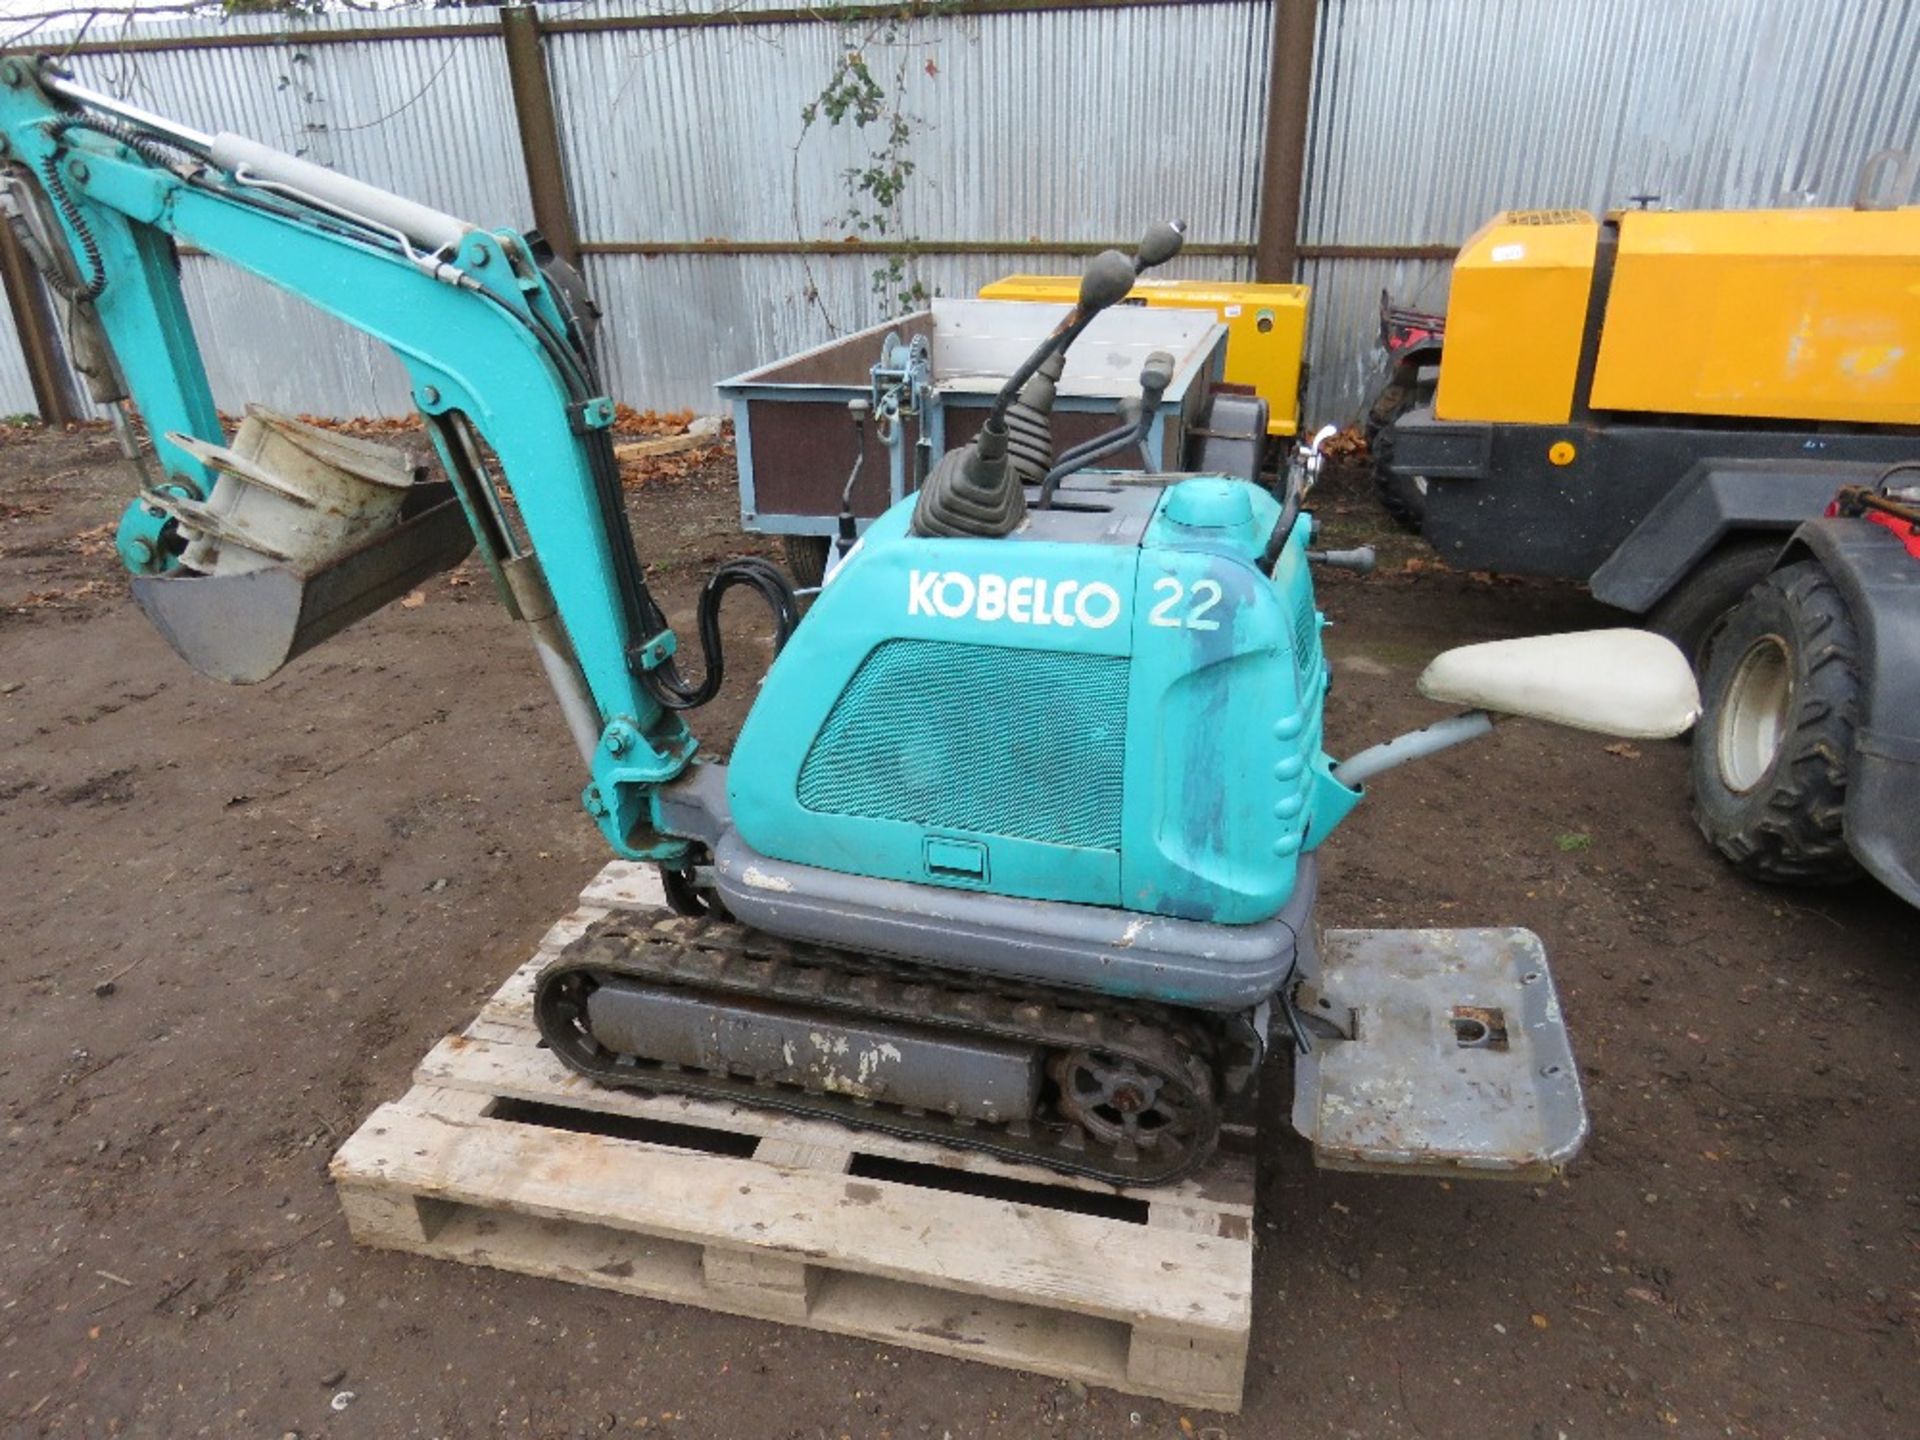 KOBELCO 22 MICRO EXCAVATOR WITH 2 X BUCKETS. PETROL ENGINED, 1049 REC HOURS. SN:FS-01494. THIS LOT I